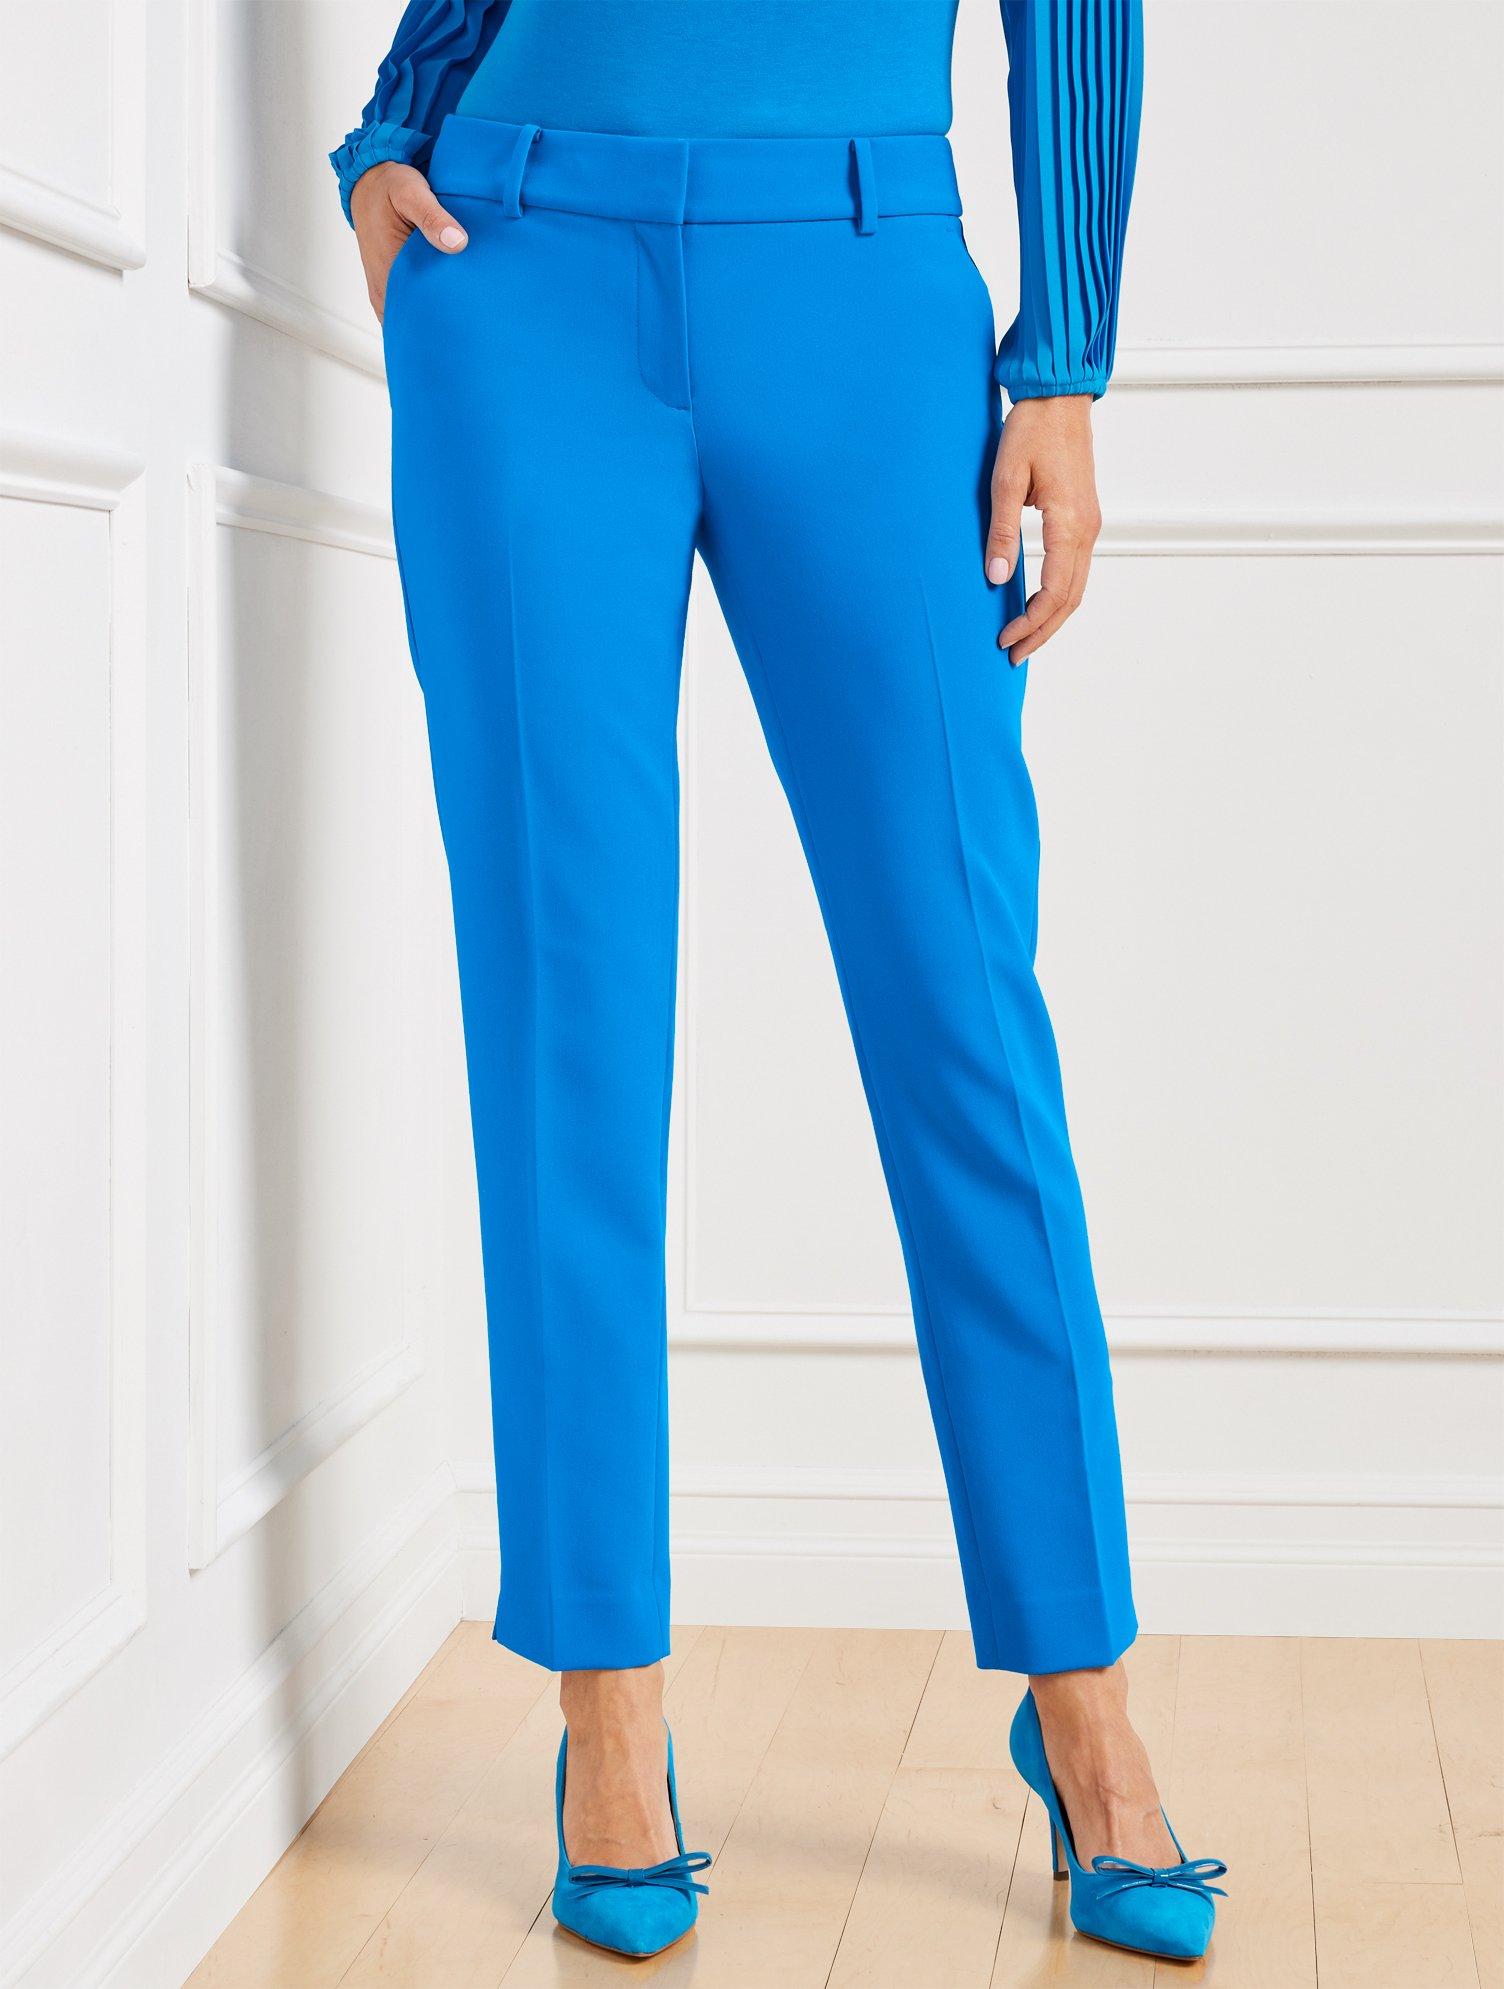 Talbots Hampshire Ankle Pants in Blue